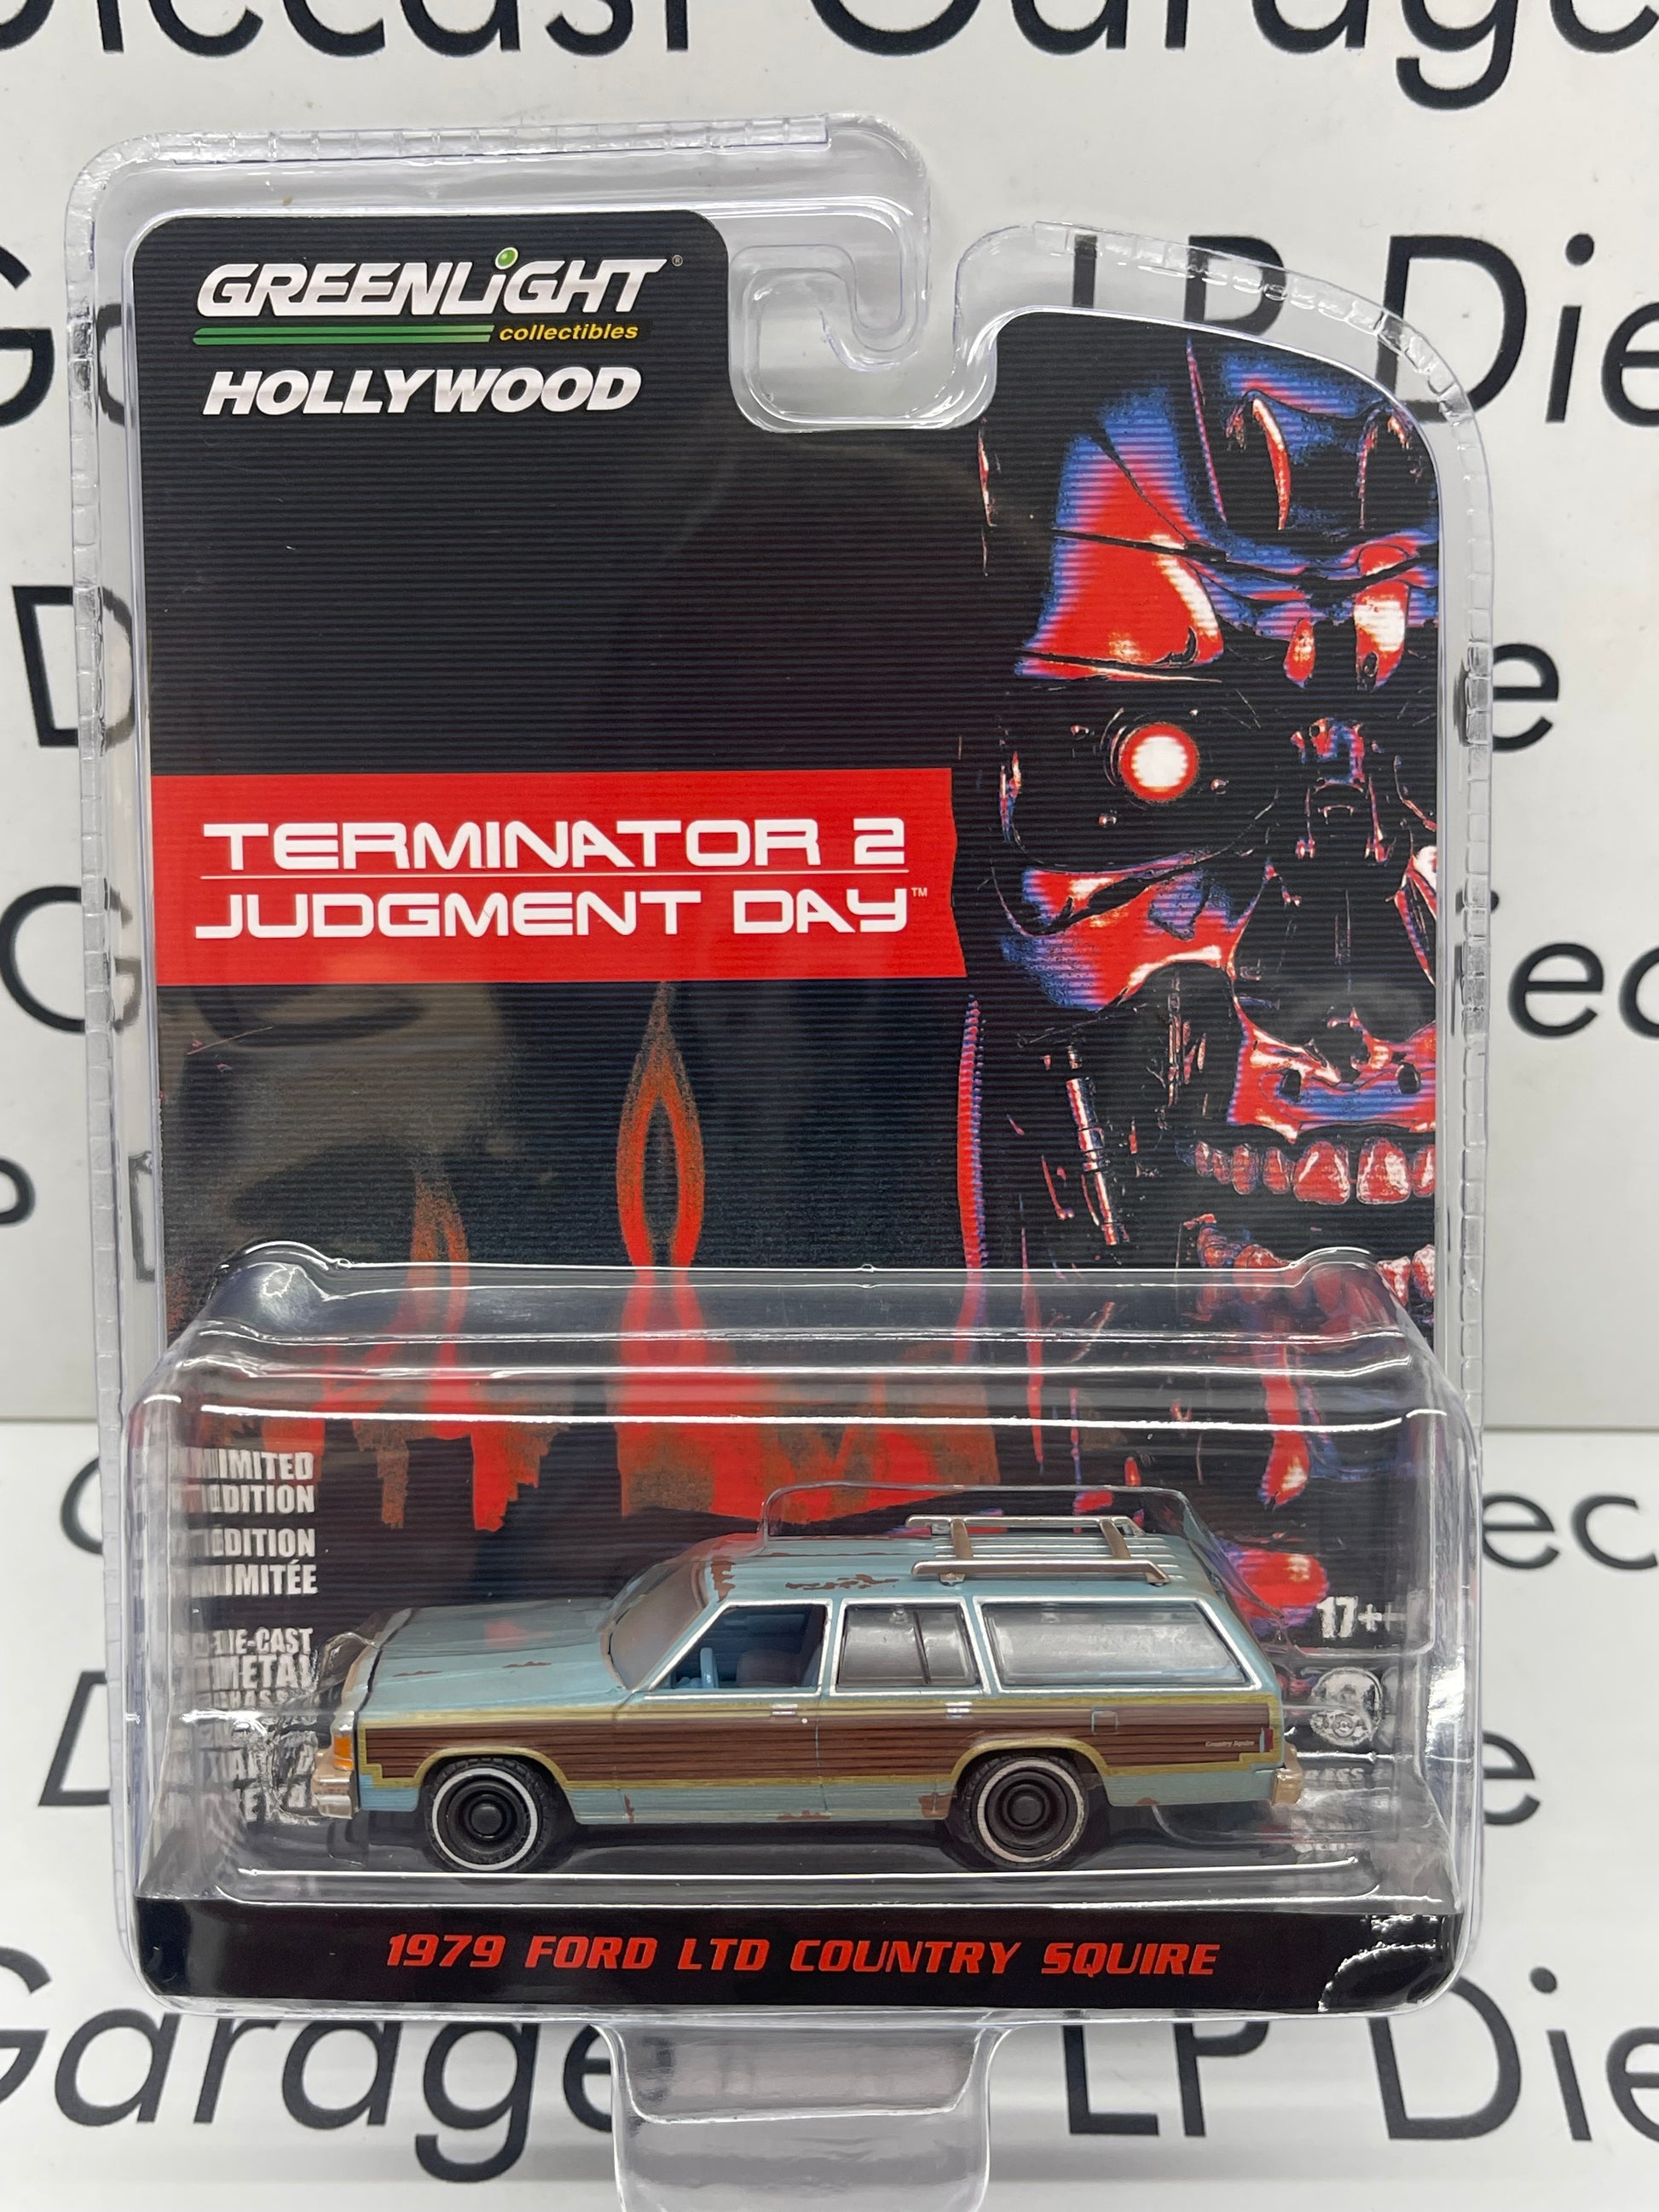 GREENLIGHT Terminator 2 Judgement Day 1979 Ford LTD Country Squire Hol ...